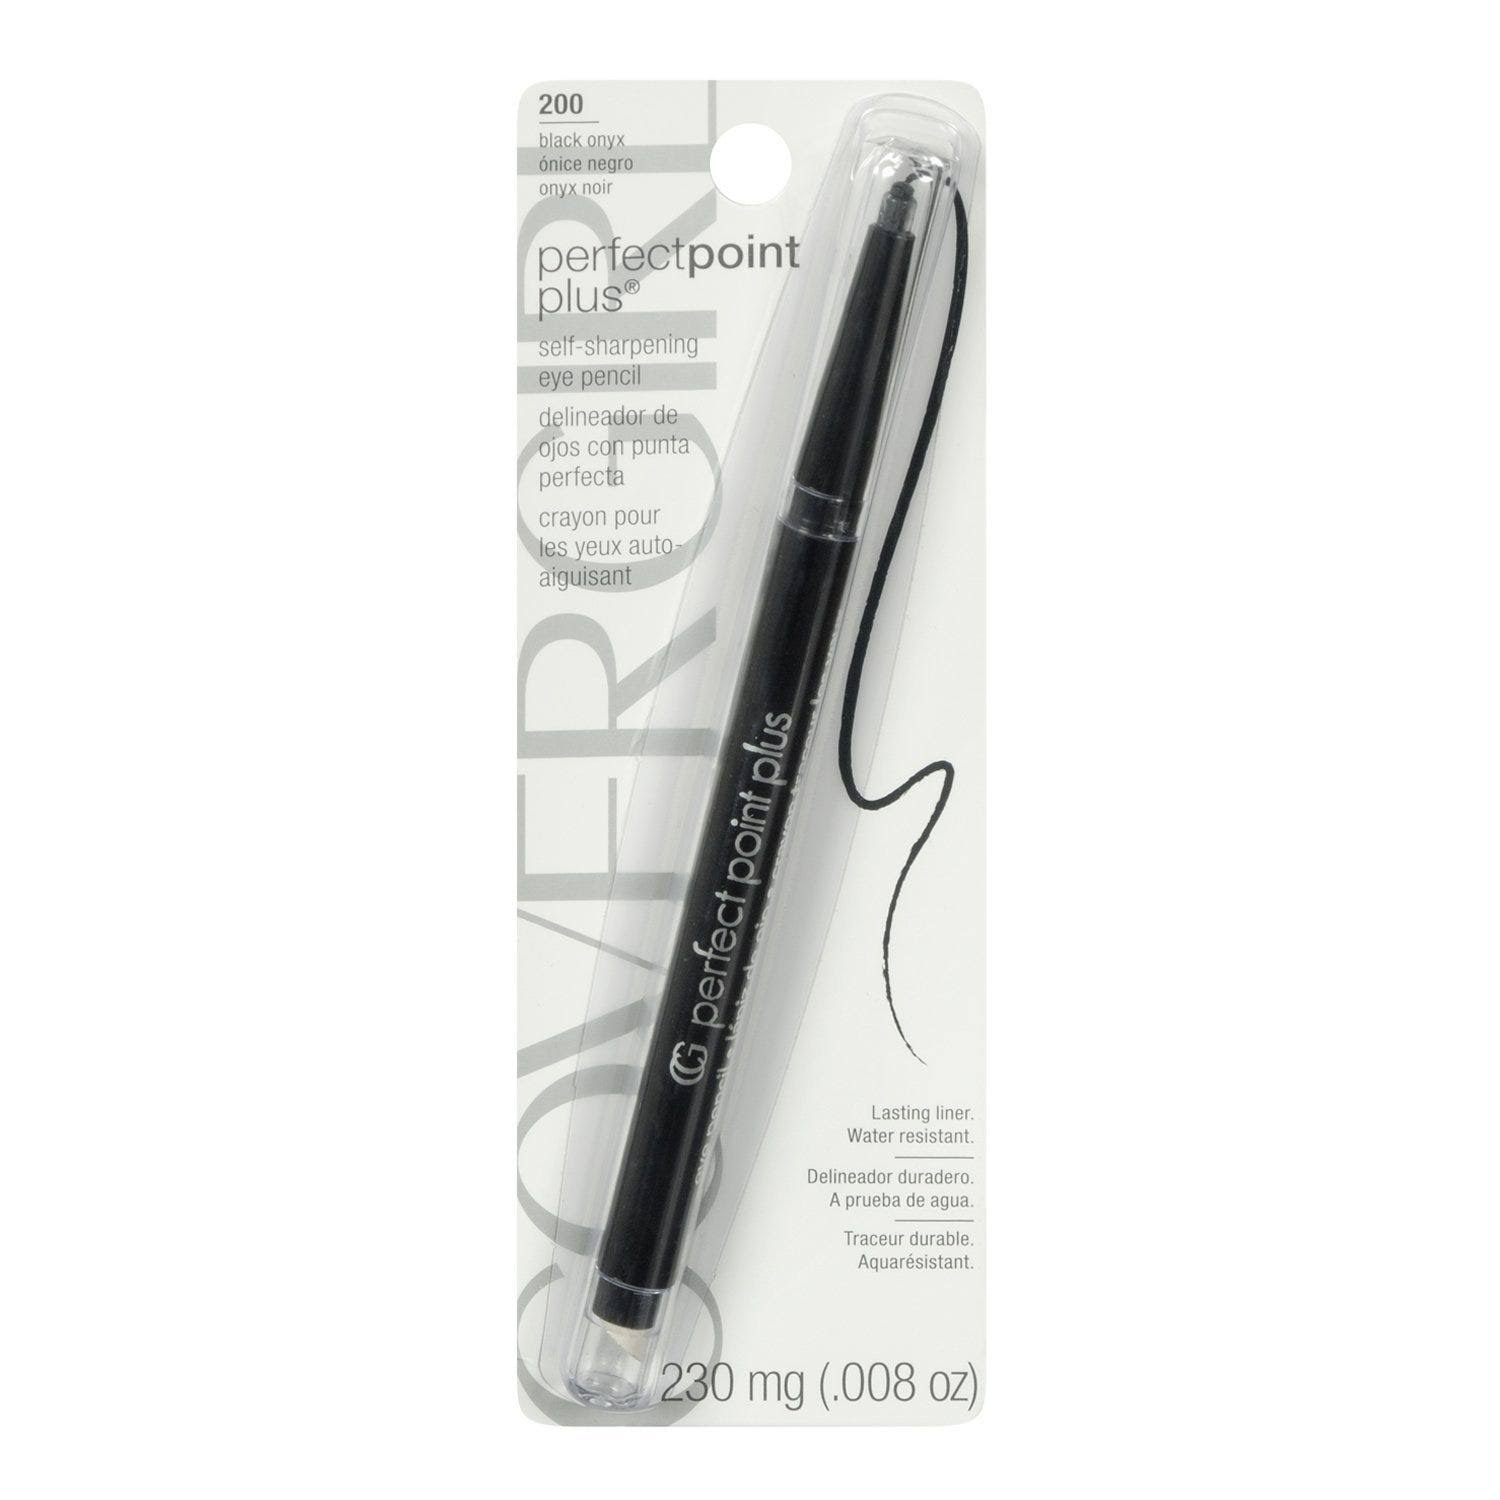 Covergirl Perfect Point Plus Eyeliner Pencil - Charcoal